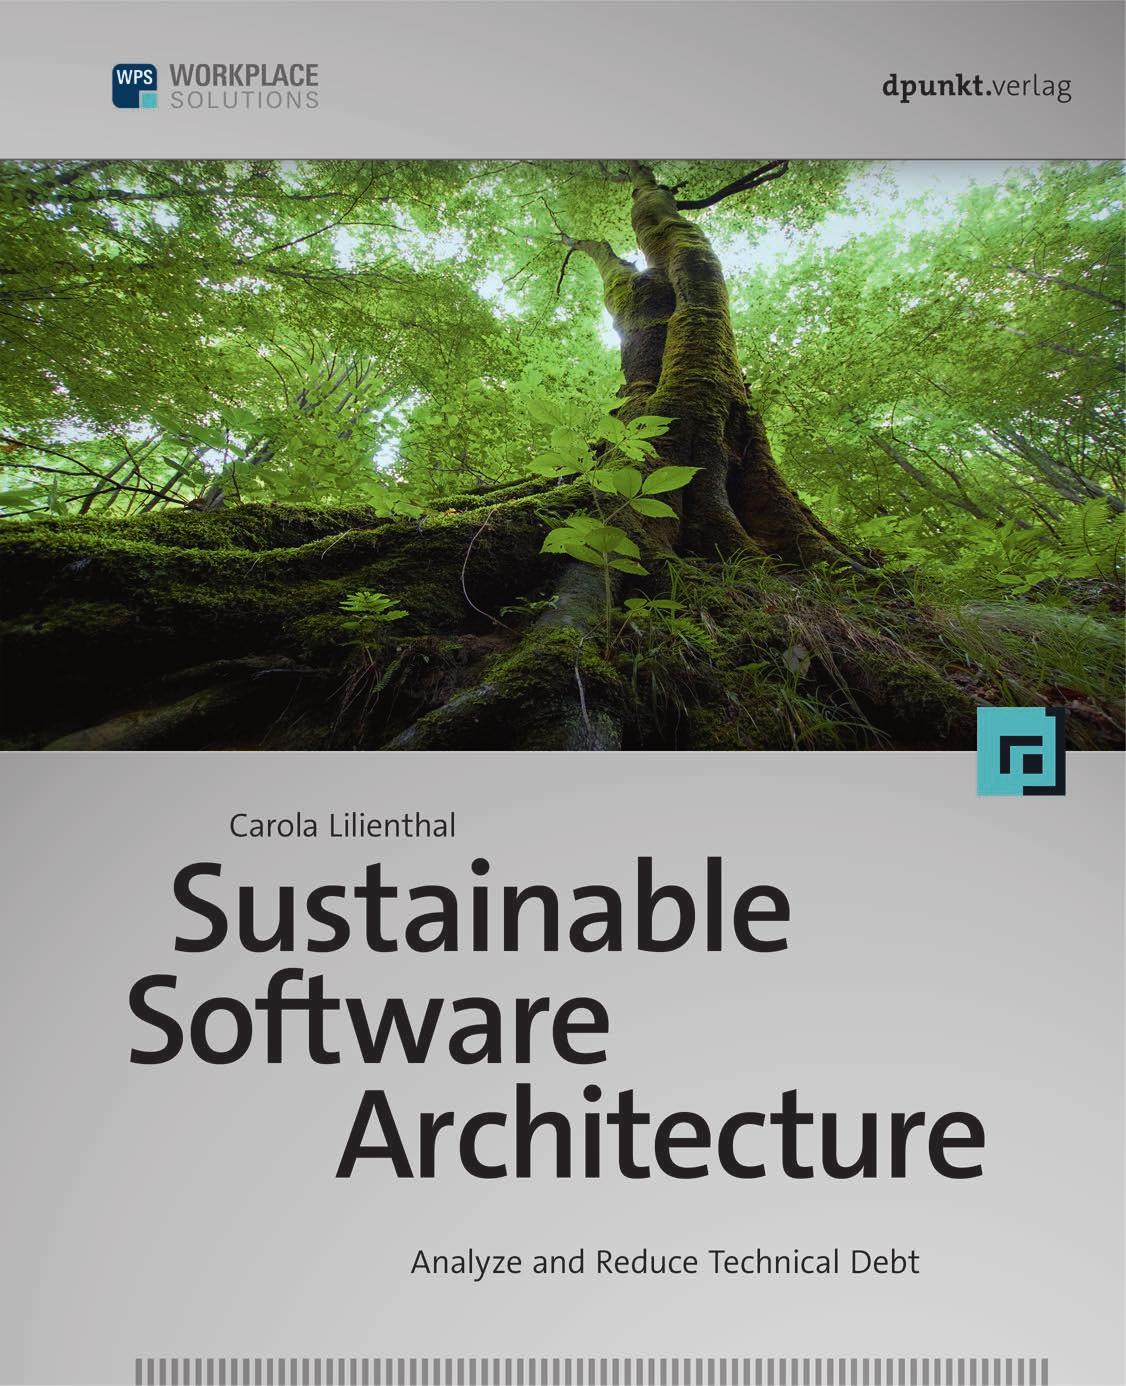 Sustainable Software Architecture: Analyze and Reduce Technical Debt